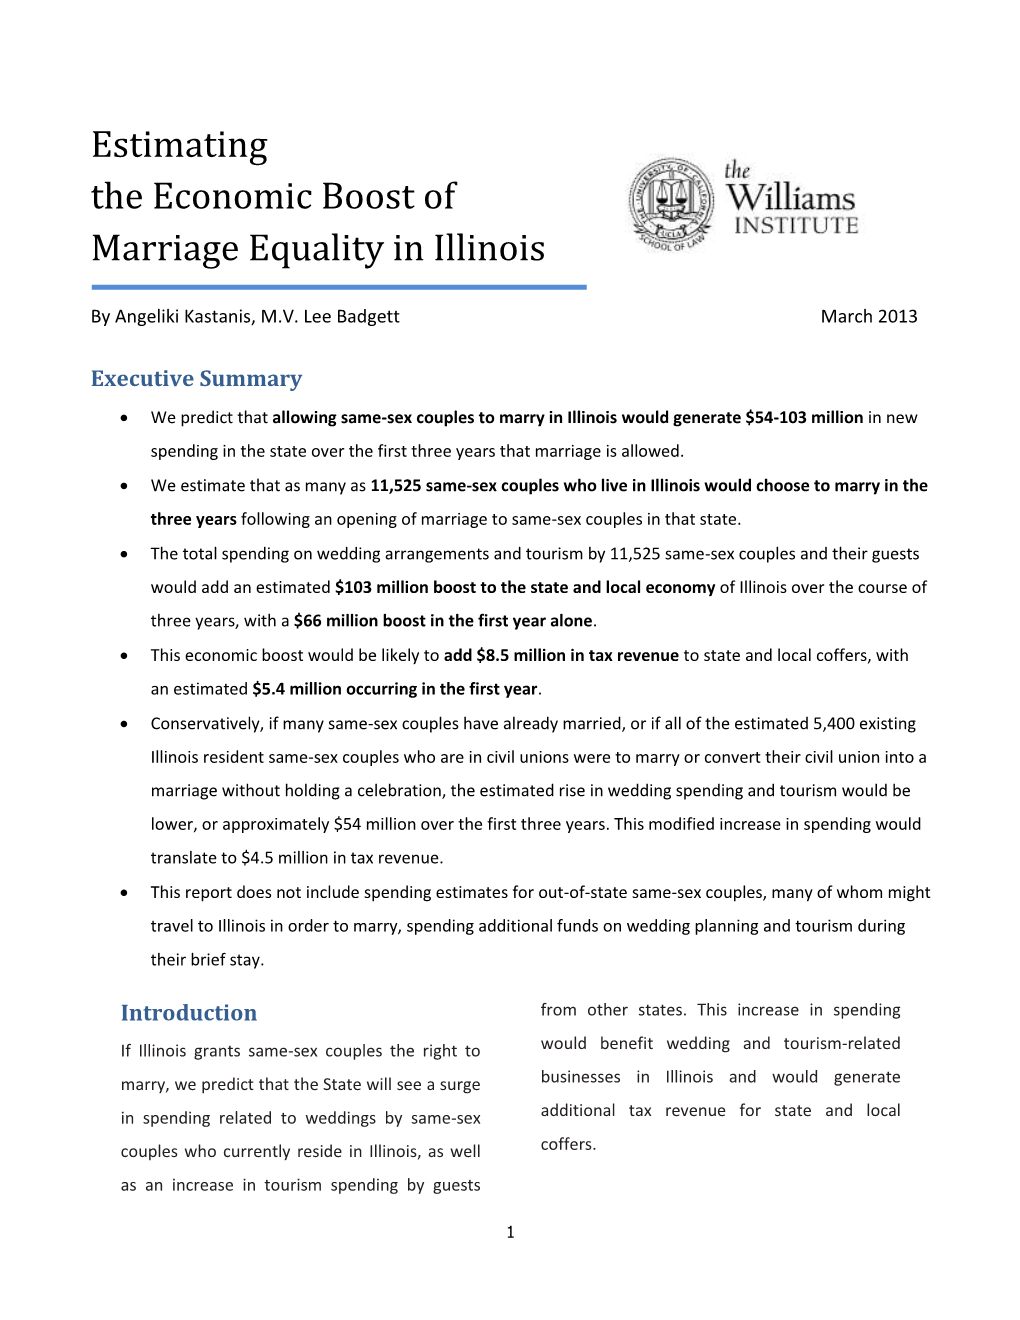 Estimating the Economic Boost of Marriage Equality in Illinois